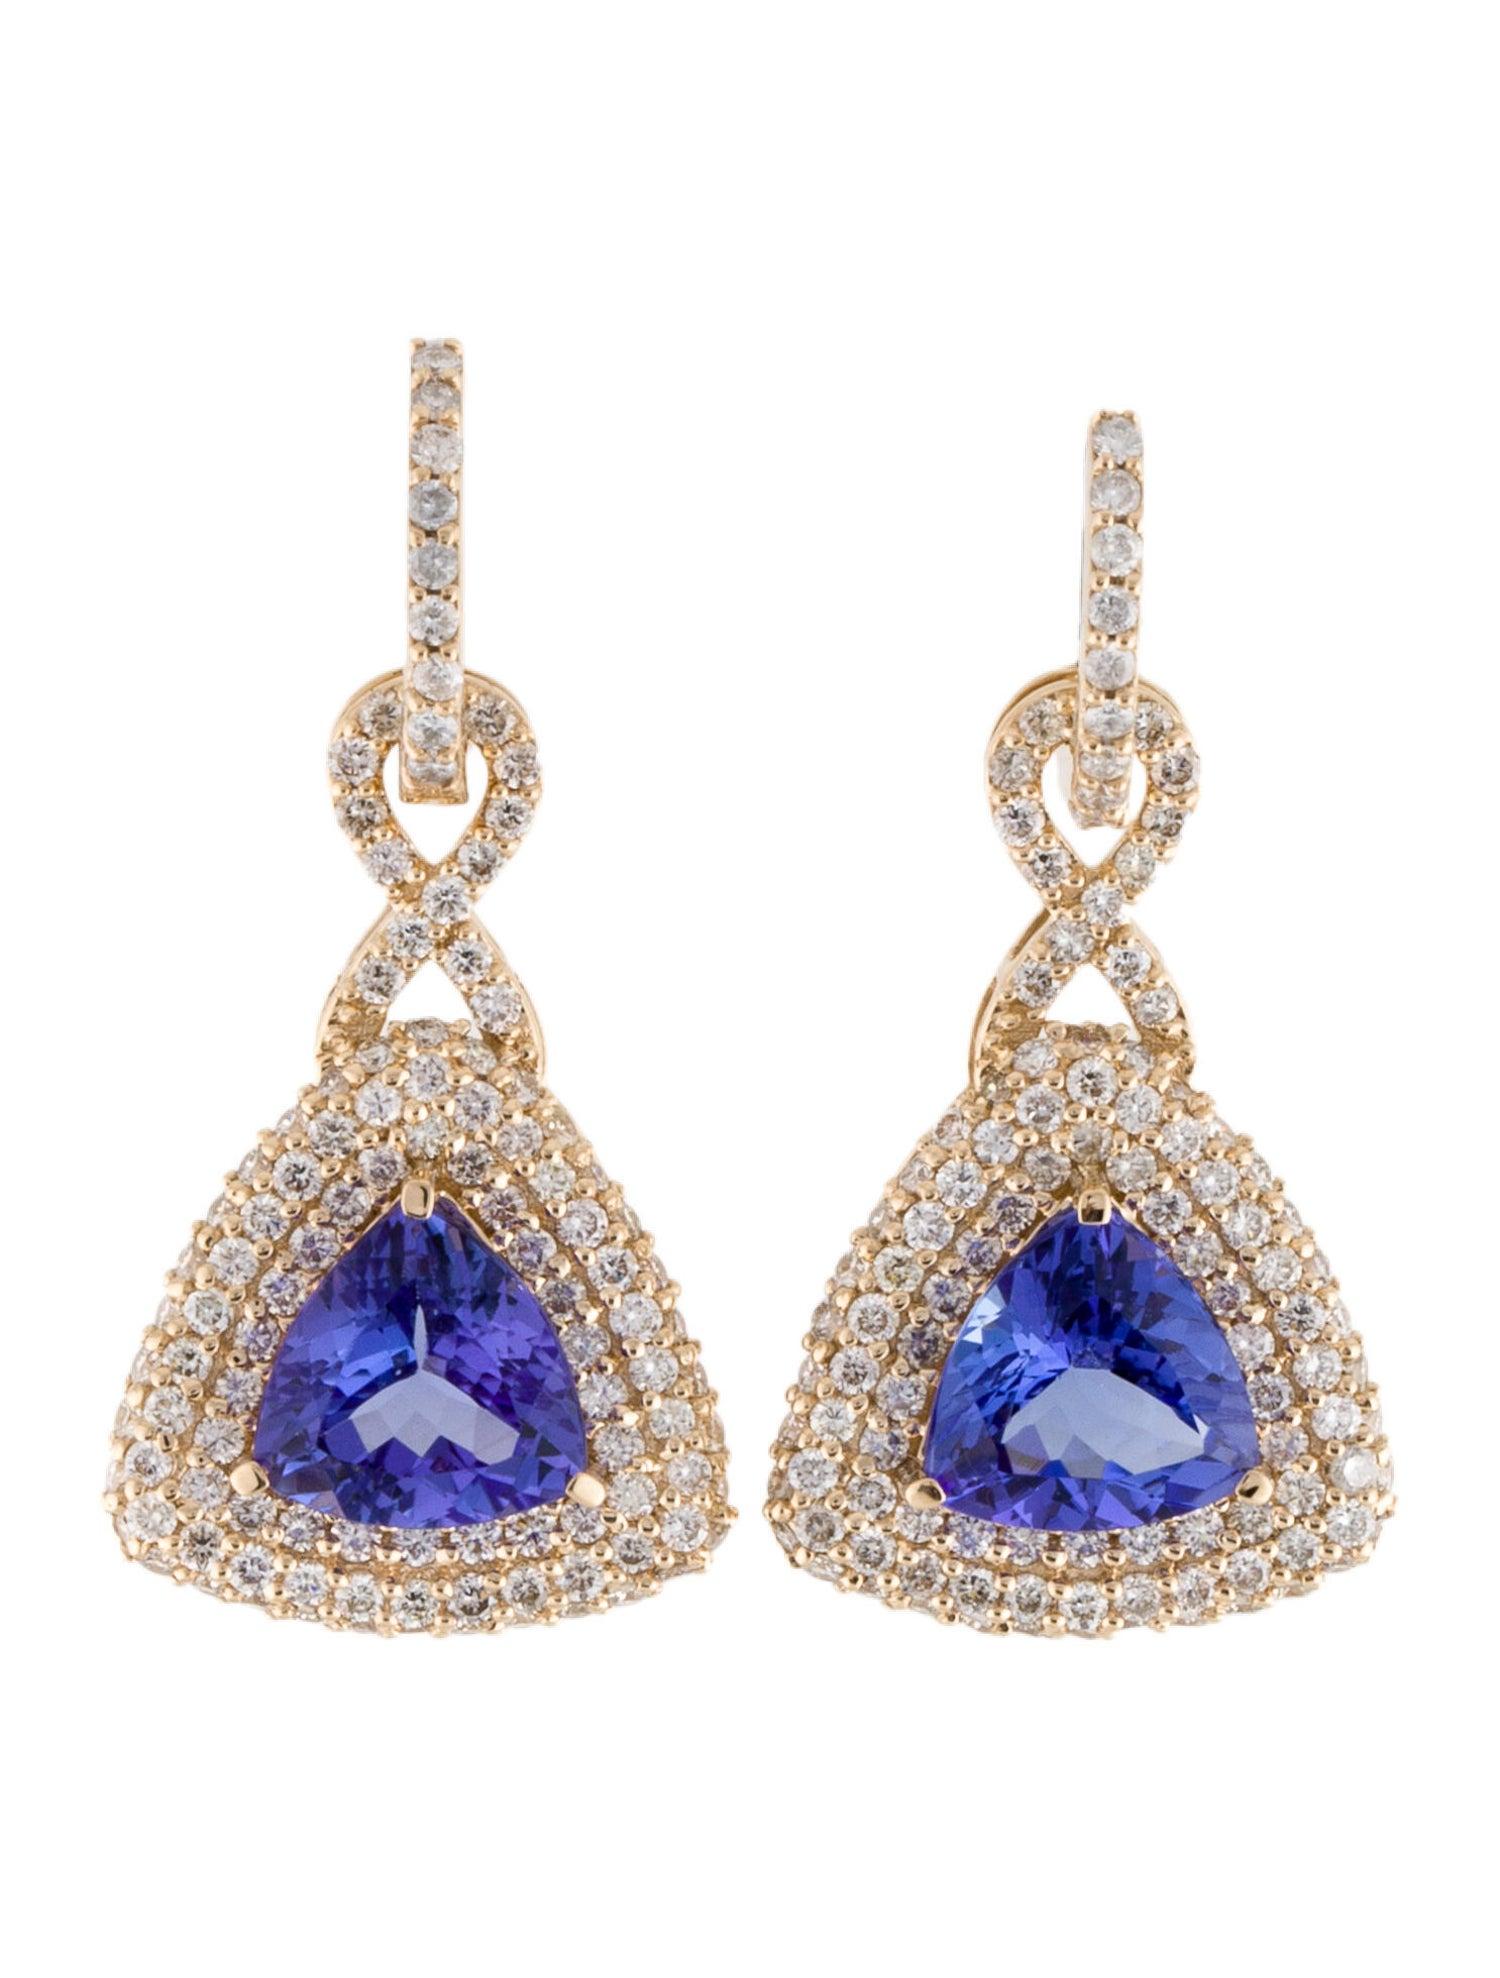 14K 3.50ctw Tanzanite & Diamond Drop Hoop Earrings - Exquisite & Timeless Design In New Condition For Sale In Holtsville, NY